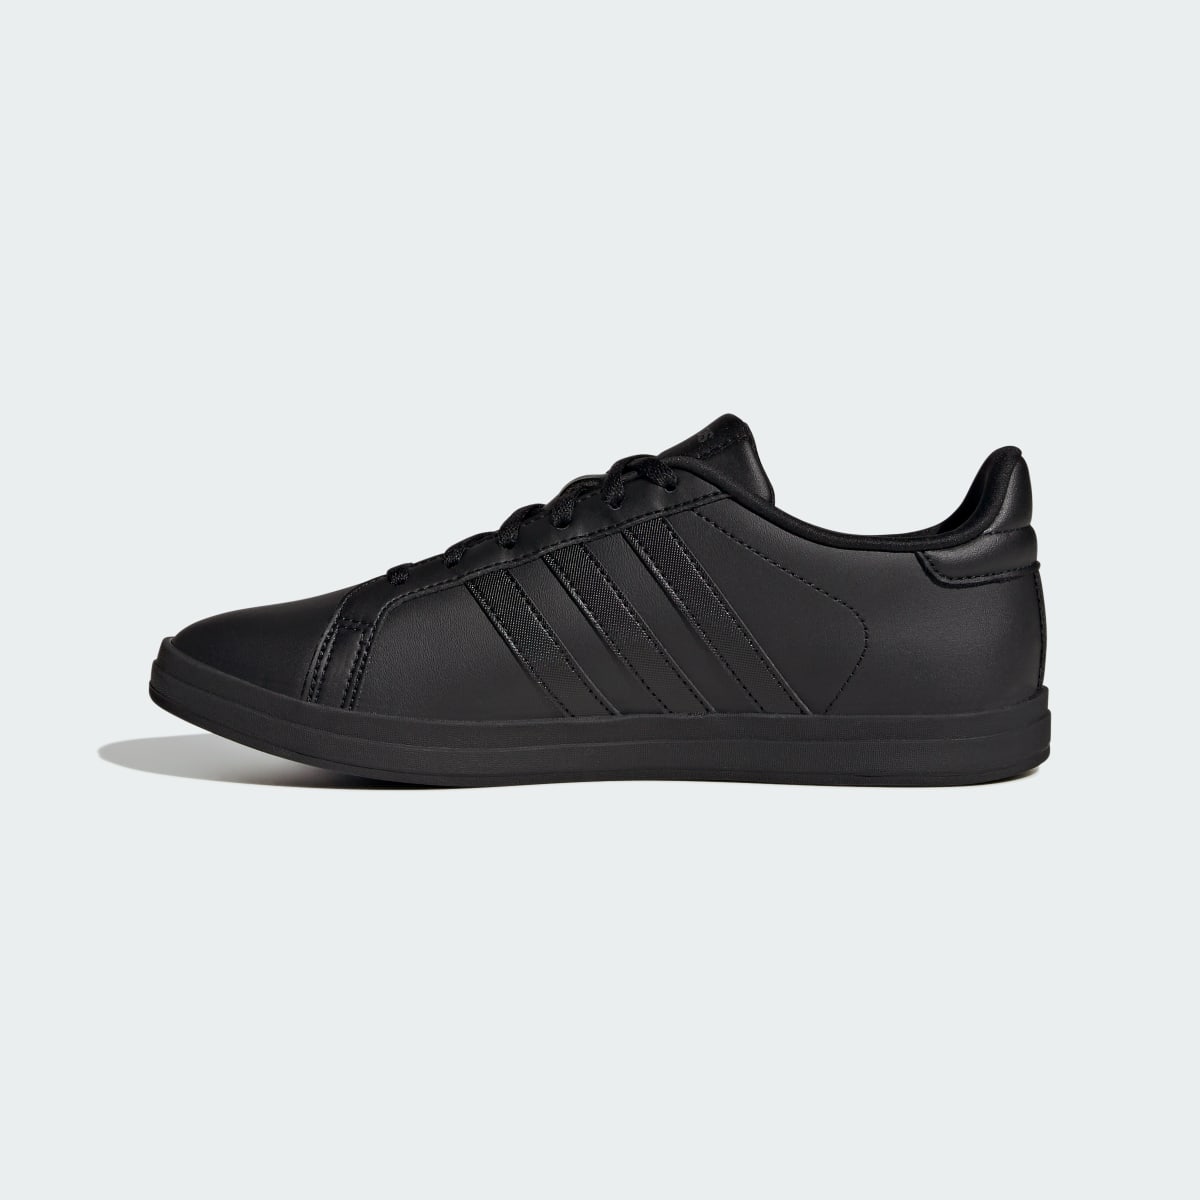 Adidas Courtpoint X Shoes. 7